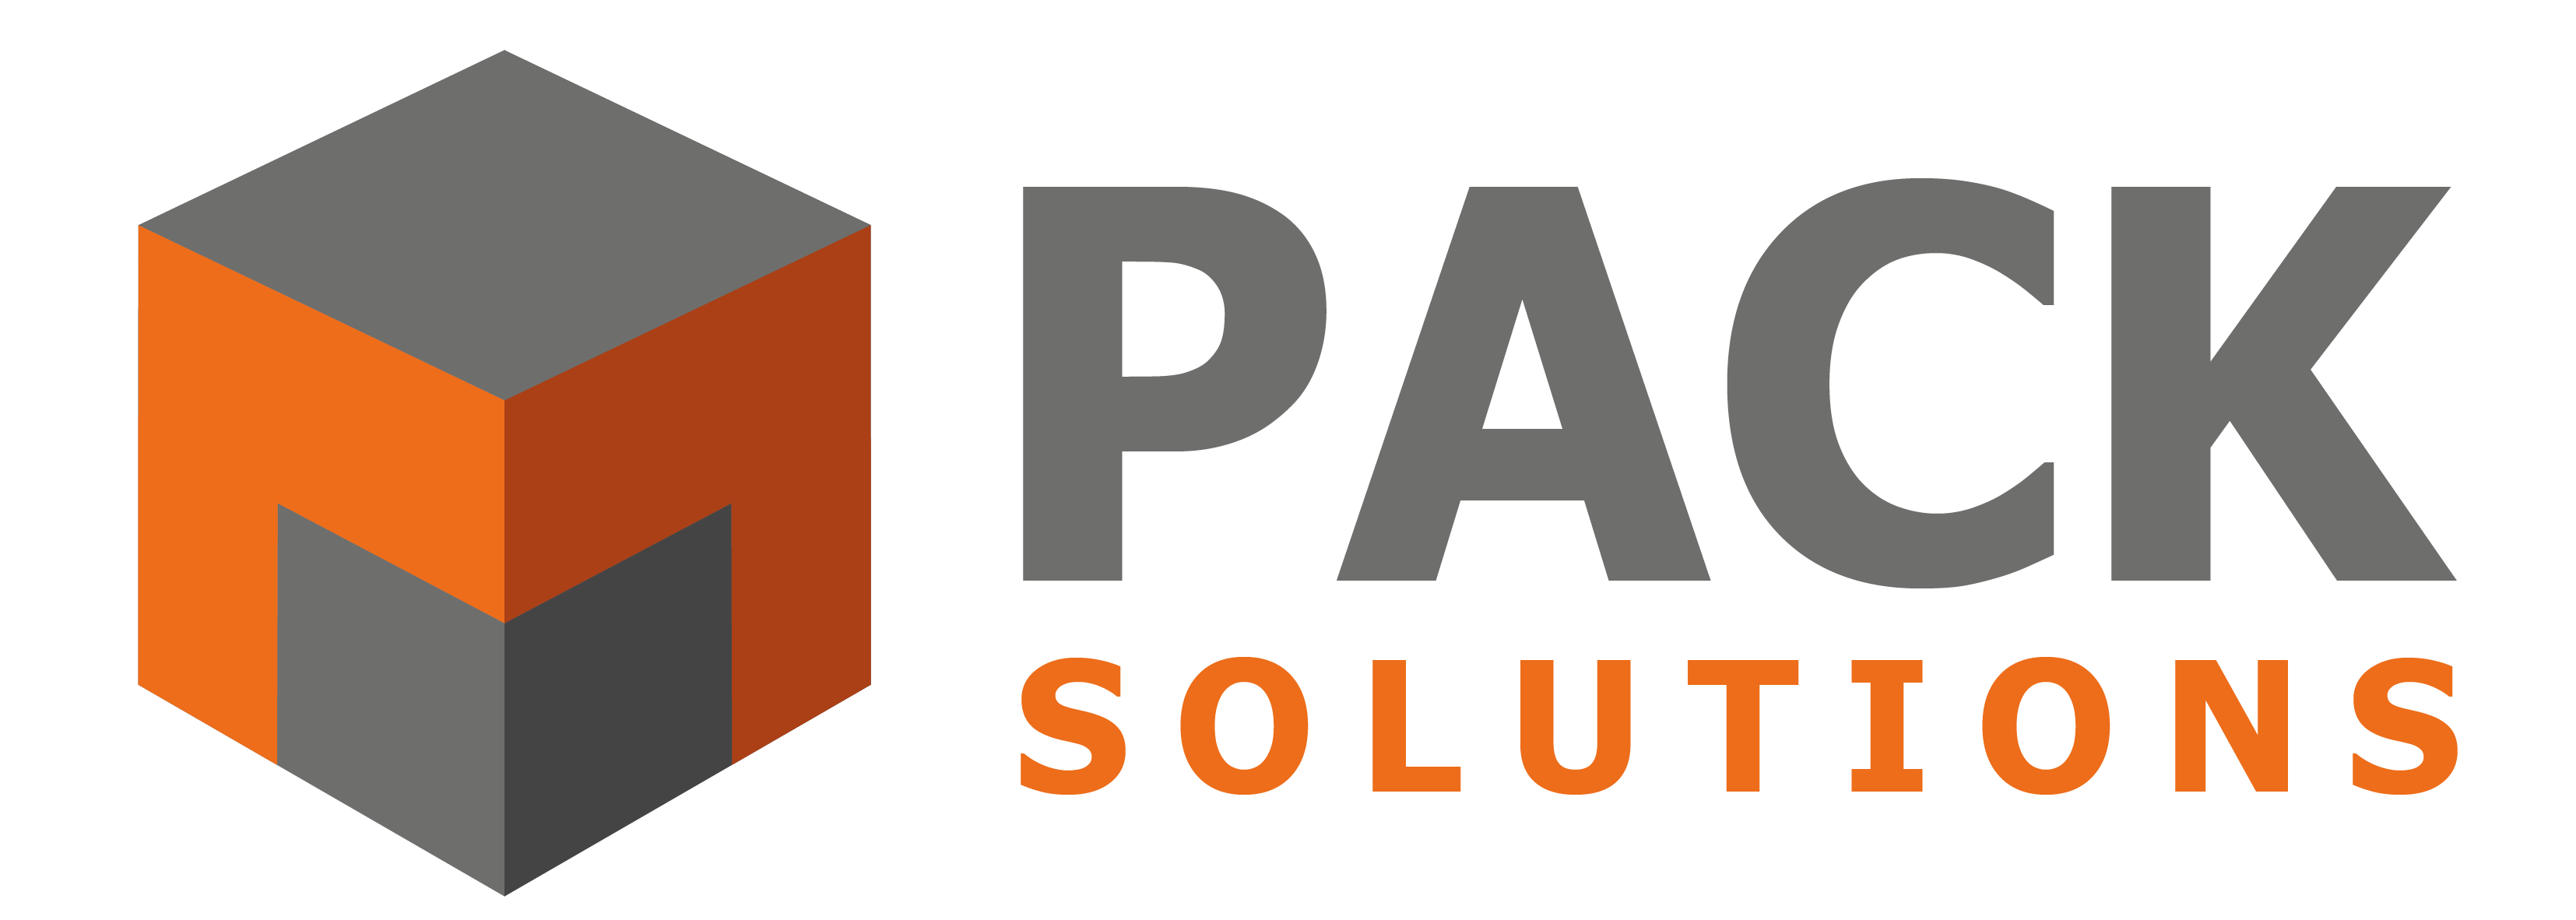 MPack Solutions